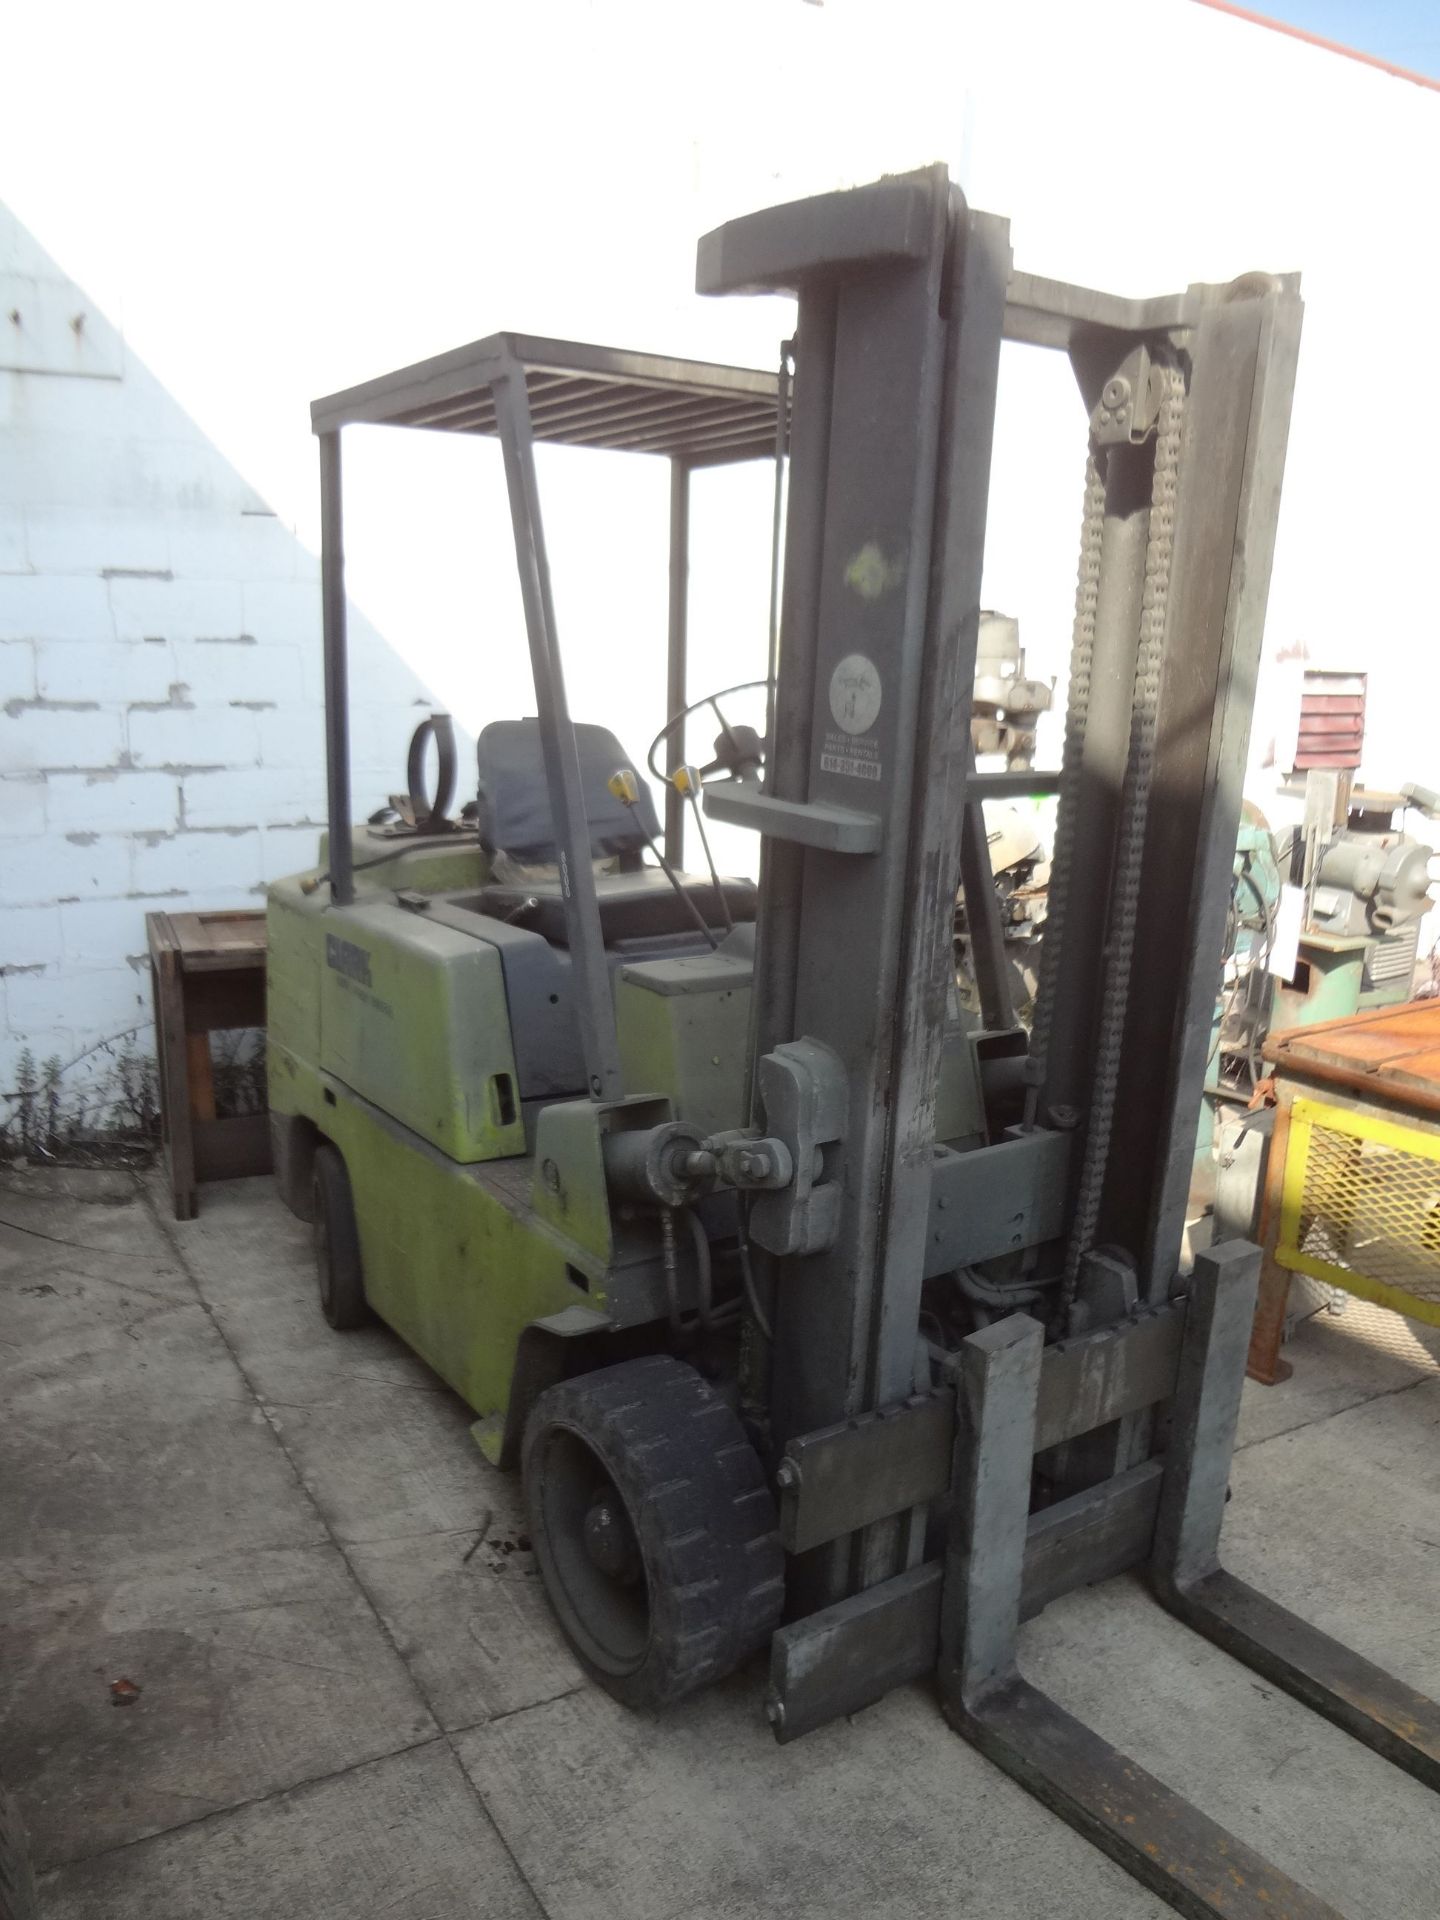 8,000 LB. CLARK MODEL C500-S80 LP GAS SOLID TIRE LIFT TRUCK; S/N 685-0084-7415KOF, 2 STAGE MAST, 90" - Image 2 of 5